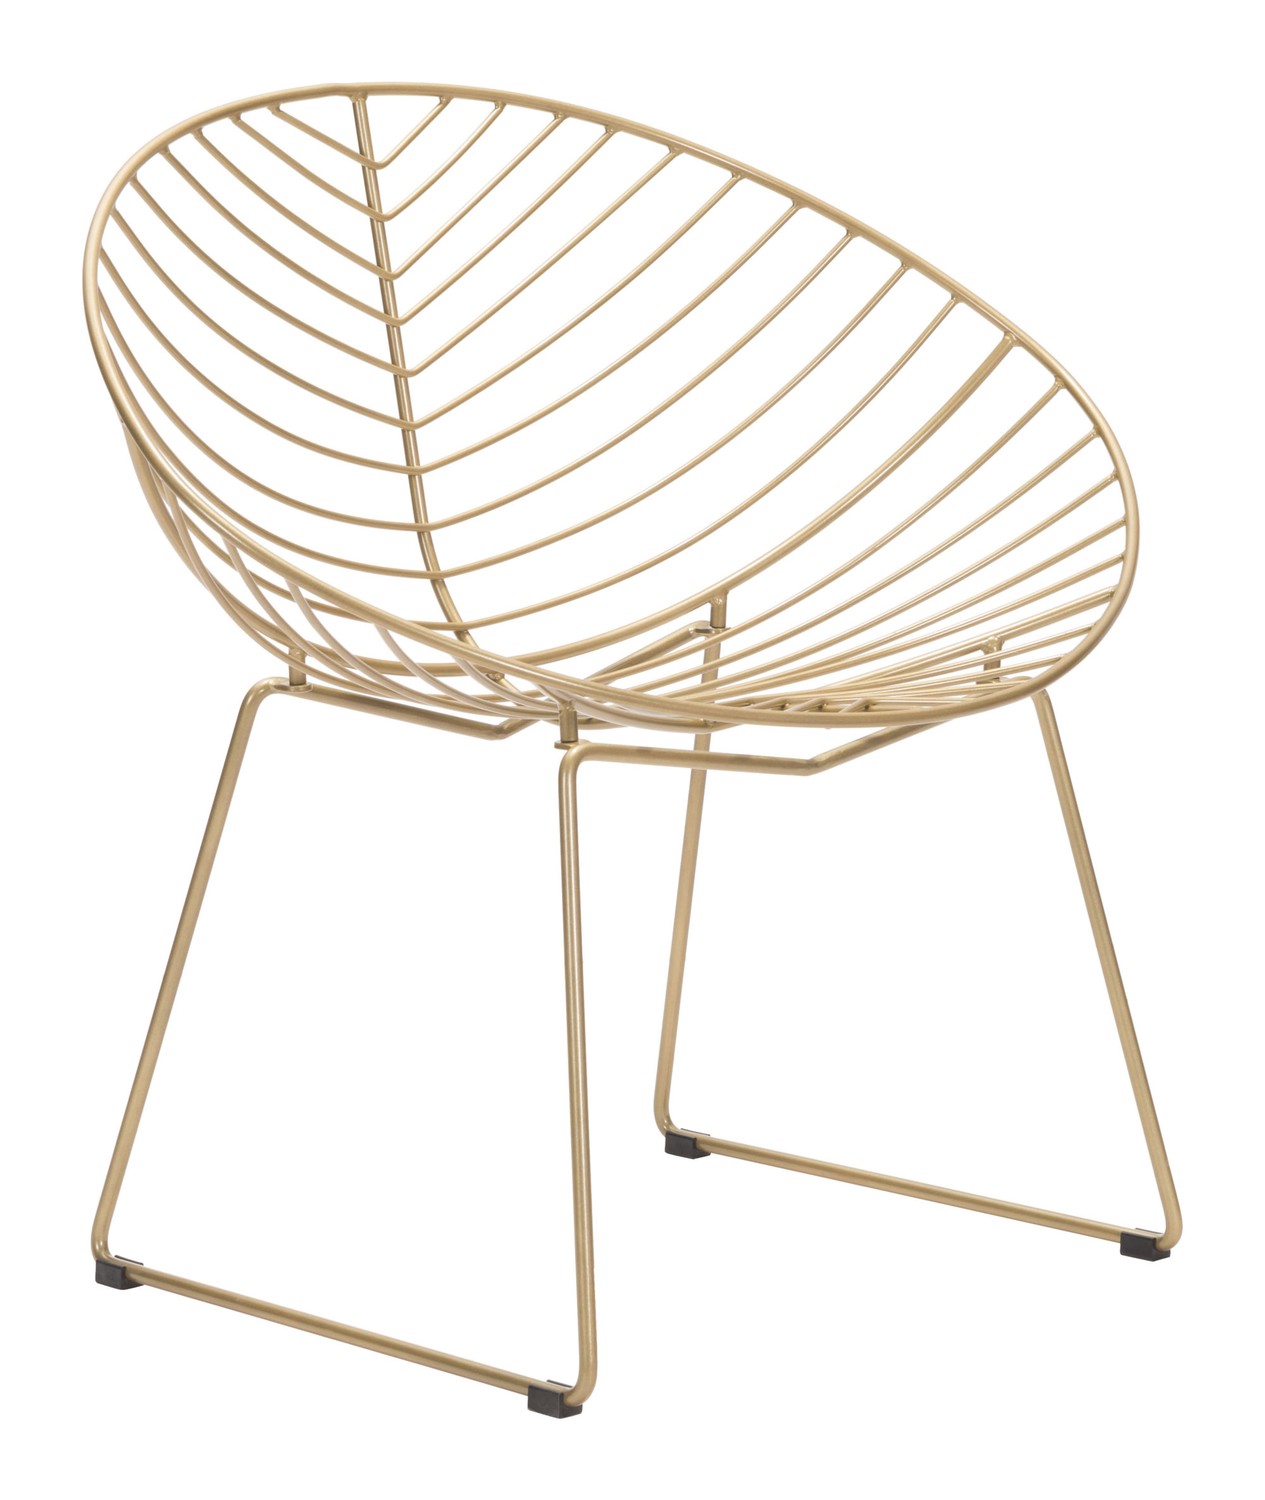 33.9" x 22.4" x 32.1" Gold, Steel, Outdoor Lounge Chair - Set of 2